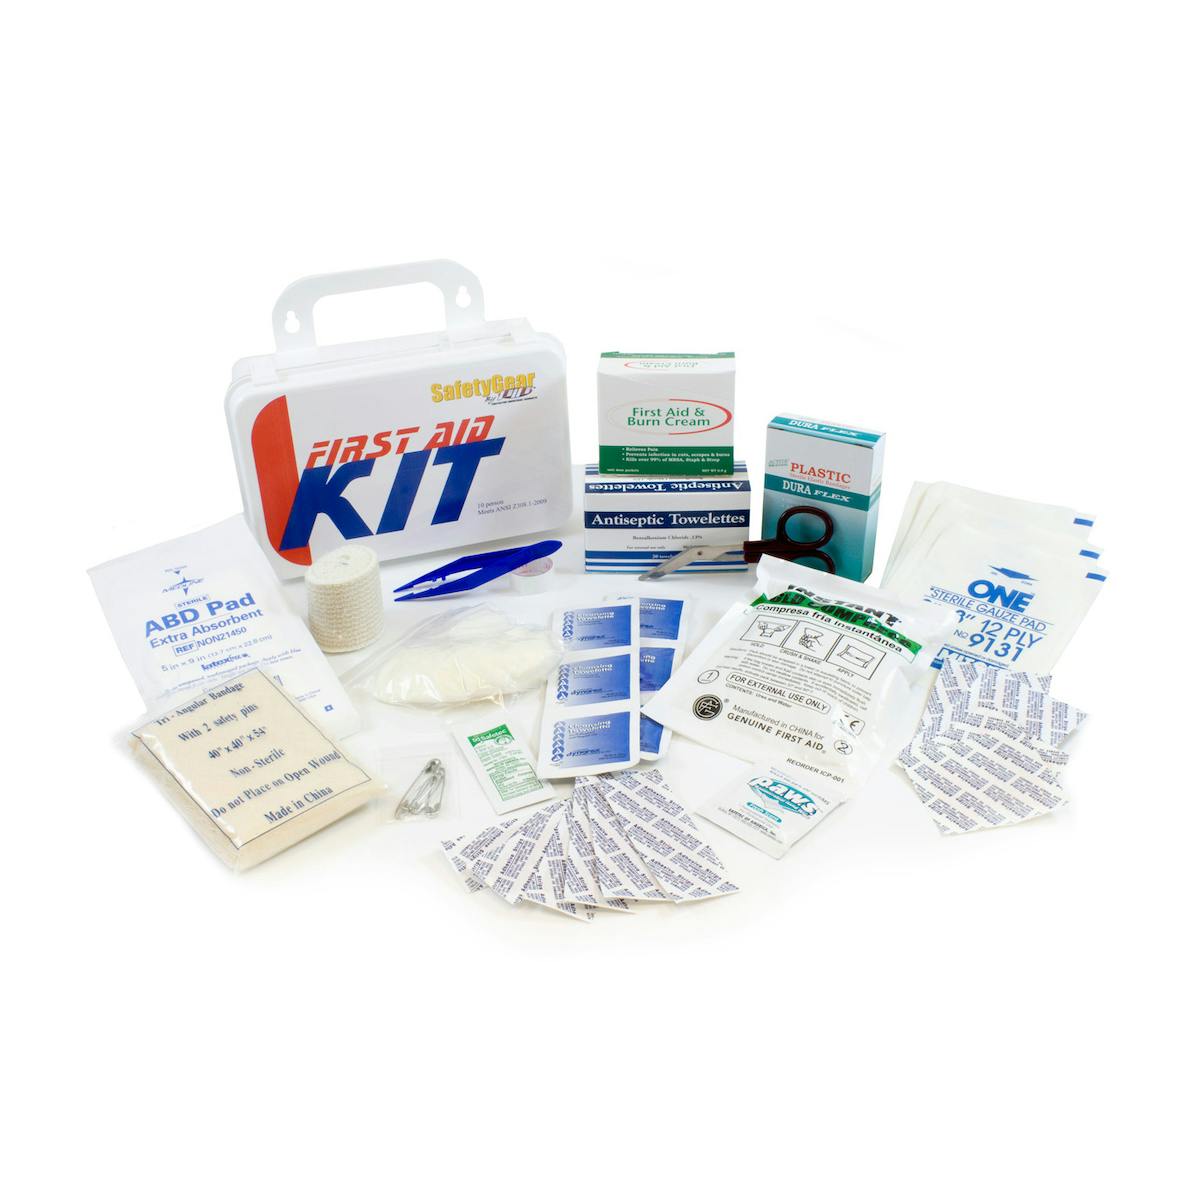 Personal First Aid Kit - 10 Person, White (299-13210) - KIT_0